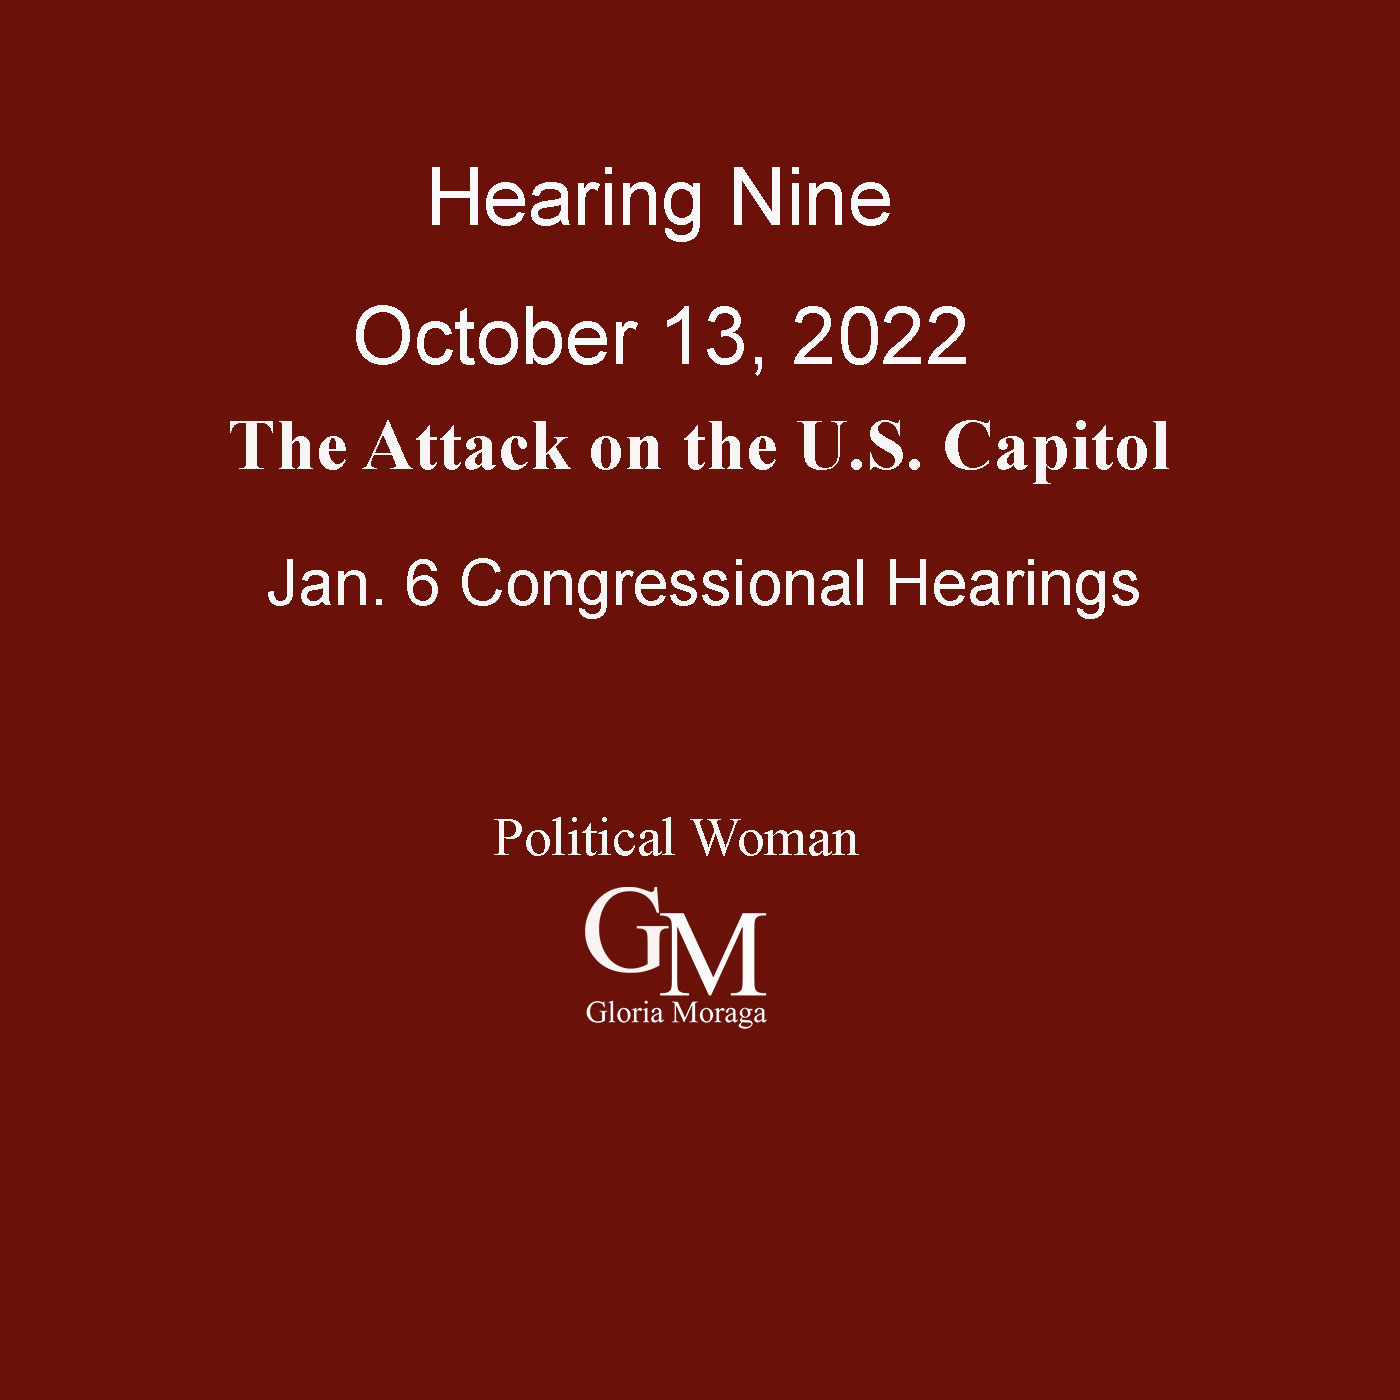 Hearing Nine October 13, 2022 The Attack on the U.S. Capitol